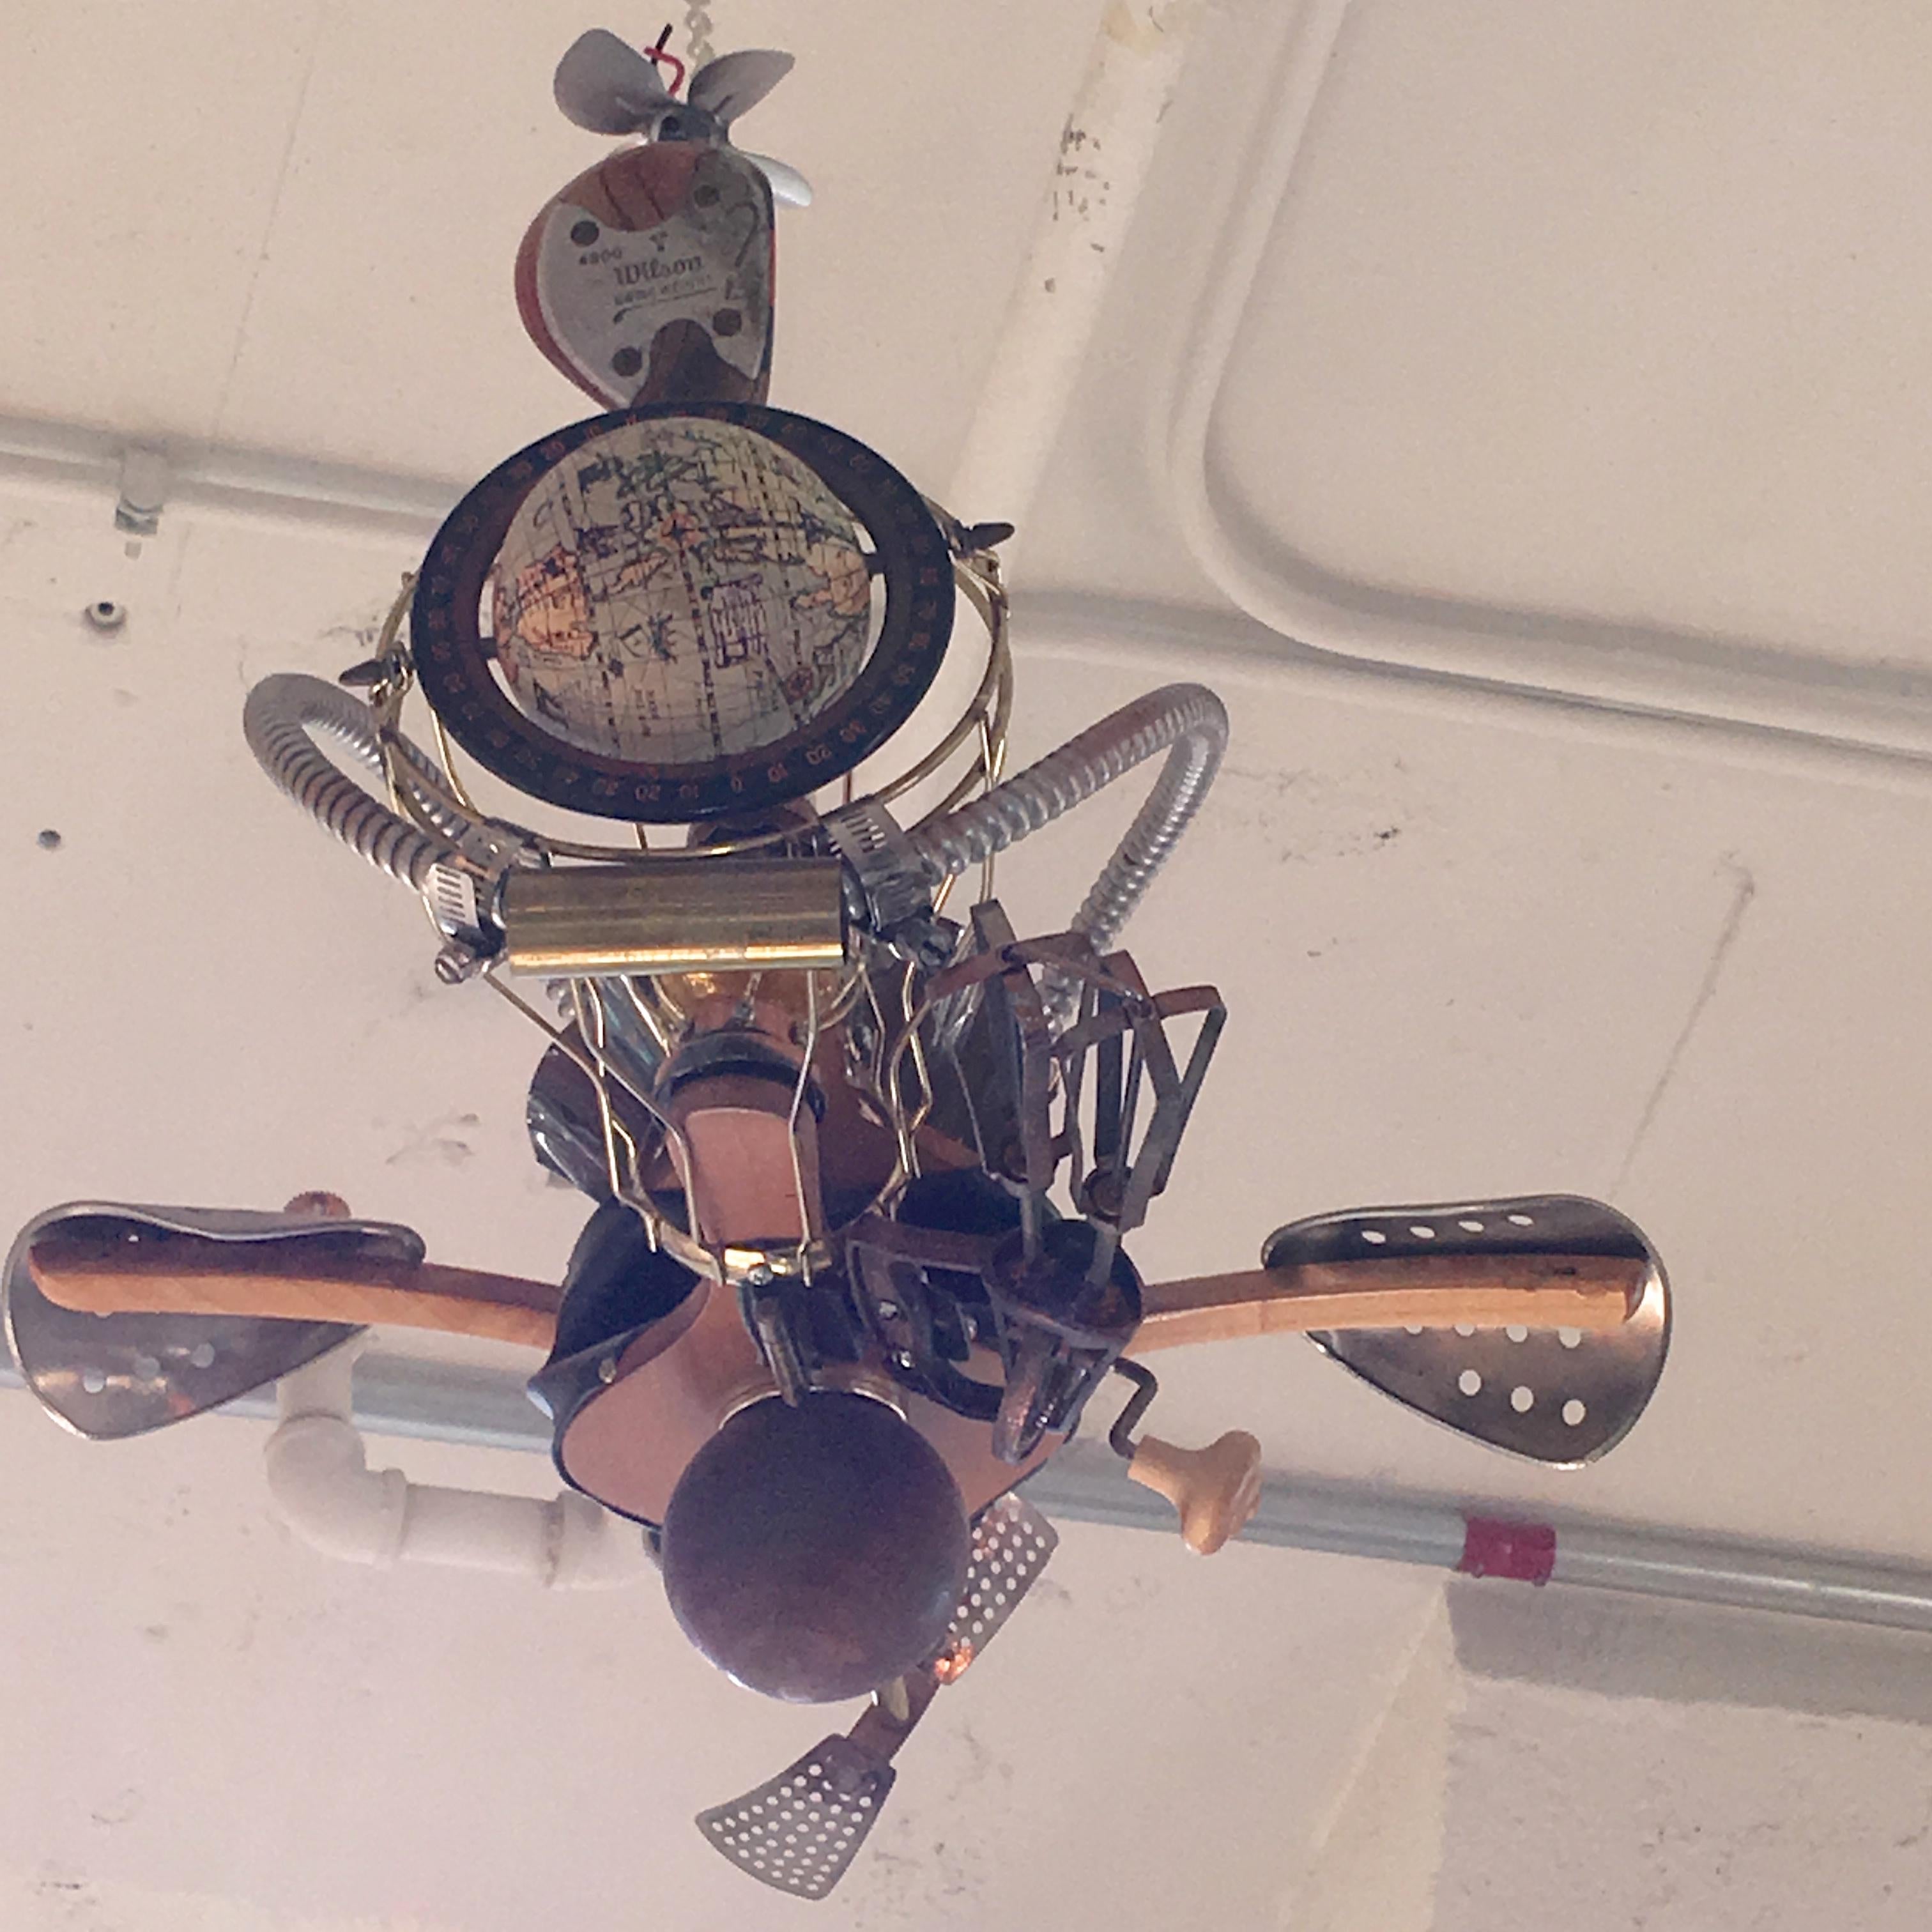 Humorous Steampunk Kinetic sculpture of a fantasy flying machine in the spirit of Chitty Chitty Bang Bang and Wild Wild West, creatively and artistically assembled from found items including: old fashioned manual egg beater, fireplace bellows,